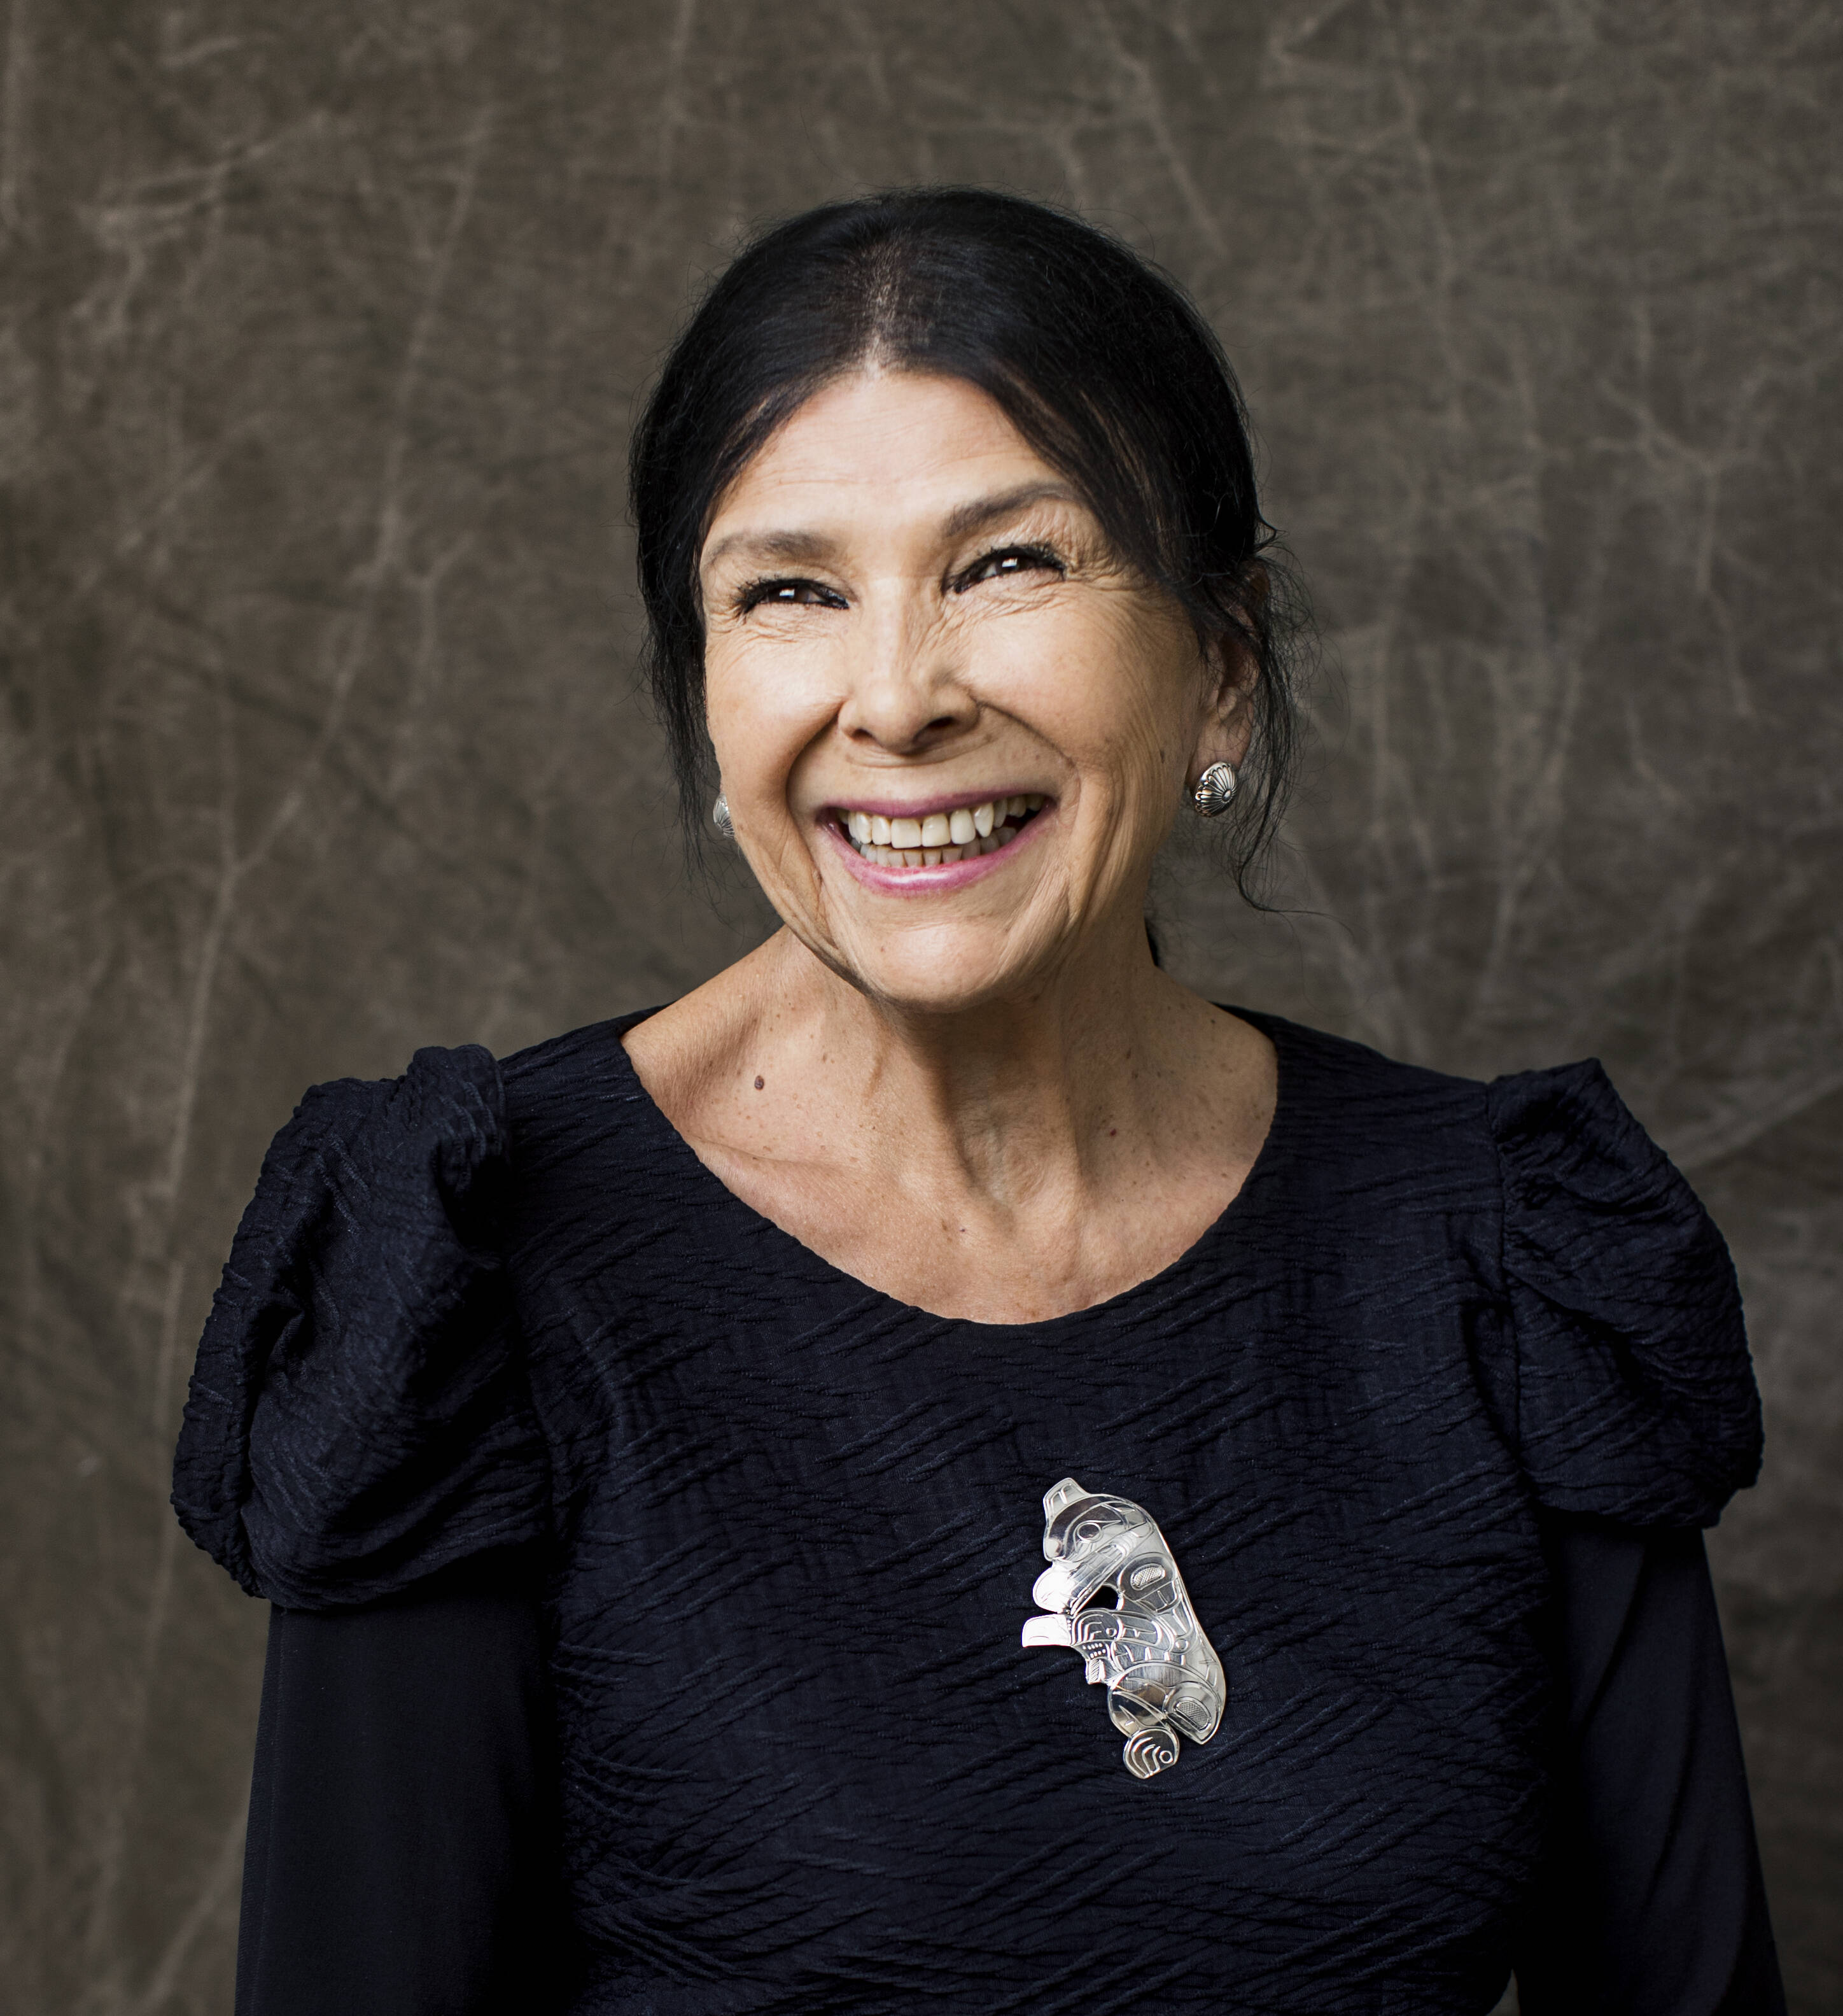 <p><strong>Alanis Obomsawin</strong></p>

<p>A member of the Abenaki Nation and one of Canada&rsquo;s most distinguished filmmakers, Alanis Obomsawin is a director and producer at the National Film Board of Canada, where she has worked since 1967.</p>

<p>Her upcoming films are Wabano: The Light of the Day and The Green Horse (working title). These will be her 56th and 57th films in a legendary career now spanning 56 years, devoted to chronicling the lives and concerns of First Nations people and exploring issues of importance to all.</p>

<p>Her 2022 film Bill Reid Remembers was named on the short film programme of Canada&rsquo;s Top Ten, honouring the best in Canadian cinema.</p>

<p>Obomsawin&rsquo;s 2019 production Jordan River Anderson, The Messenger completed a seven-film cycle devoted to the rights of Indigenous children and Peoples.</p>

<p>Her body of work includes such landmark films as Kanehsatake: 270 Years of Resistance (1993), documenting the 1990 Kanien&rsquo;k&eacute;haka (Mohawk) uprising in Kanehsatake and Oka, as well as her ground-breaking Incident at Restigouche (1984), a behind-the-scenes look at Quebec police raids on a Mi&rsquo;kmaq reserve.</p>

<p>From April 7 to August 6, 2023, the Vancouver Art Gallery is presenting The Children Have to Hear Another Story &ndash; Alanis Obomsawin, an exhibition tracing Obomsawin&rsquo;s artistic activism over five decades, first shown at the Haus der Kulturen der Welt in Berlin in 2022 and accompanied by the book Alanis Obomsawin: Lifework (published by Prestel).</p>

<p>On April 18, 2023, she will be honoured with a tribute in the Senate of Canada, and in June, Obomsawin will receive an Honorary Doctor of Laws from the University of Toronto &ndash; her 13th honorary degree.</p>

<p>On July 23, Obomsawin will receive the Edward MacDowell Medal, which recognises individuals who have made significant cultural contributions. She is the first woman filmmaker to receive this award in its 63-year history.</p>

<p>In 2021, the Toronto International Film Festival presented Obomsawin with the Jeff Skoll Award in Impact Media, recognizing leadership in creating a union between social impact and cinema, along with a career retrospective entitled Celebrating Alanis.</p>

<p>In 2020, Obomsawin received the Rogers-DOC Luminary Award at the DOC Institute Awards, in addition to the Glenn Gould Prize.</p>

<p>Image credit:&nbsp;Julie Artacho</p>

<p>&nbsp;</p>

<p>&nbsp;</p>
